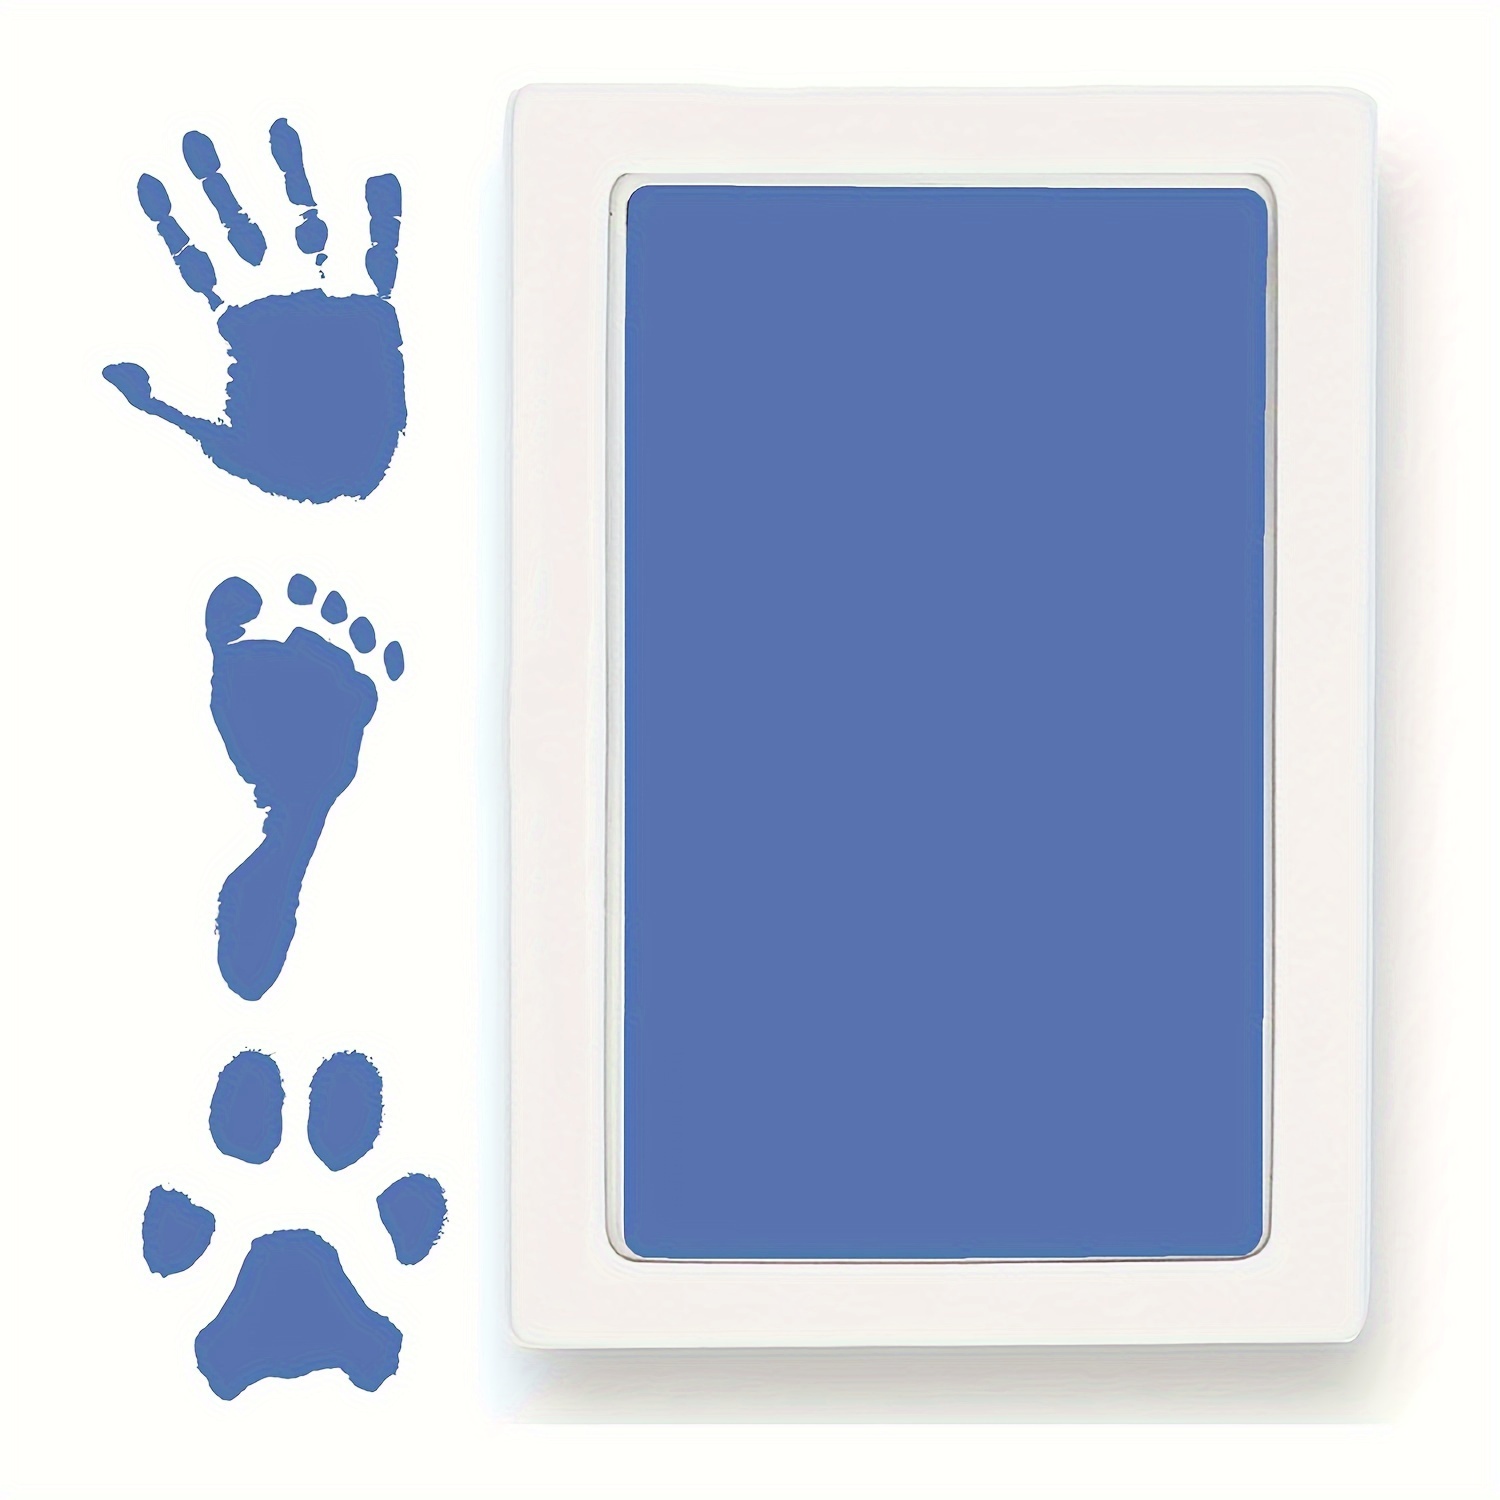  Baby Footprint Kit Ink Pad for Baby Hand and Footprints - 4  Pack Baby Hand and Footprint Kit,Newborn Footprint Kit Baby  Keepsake,Inkless Hand and Footprint Kit : Baby